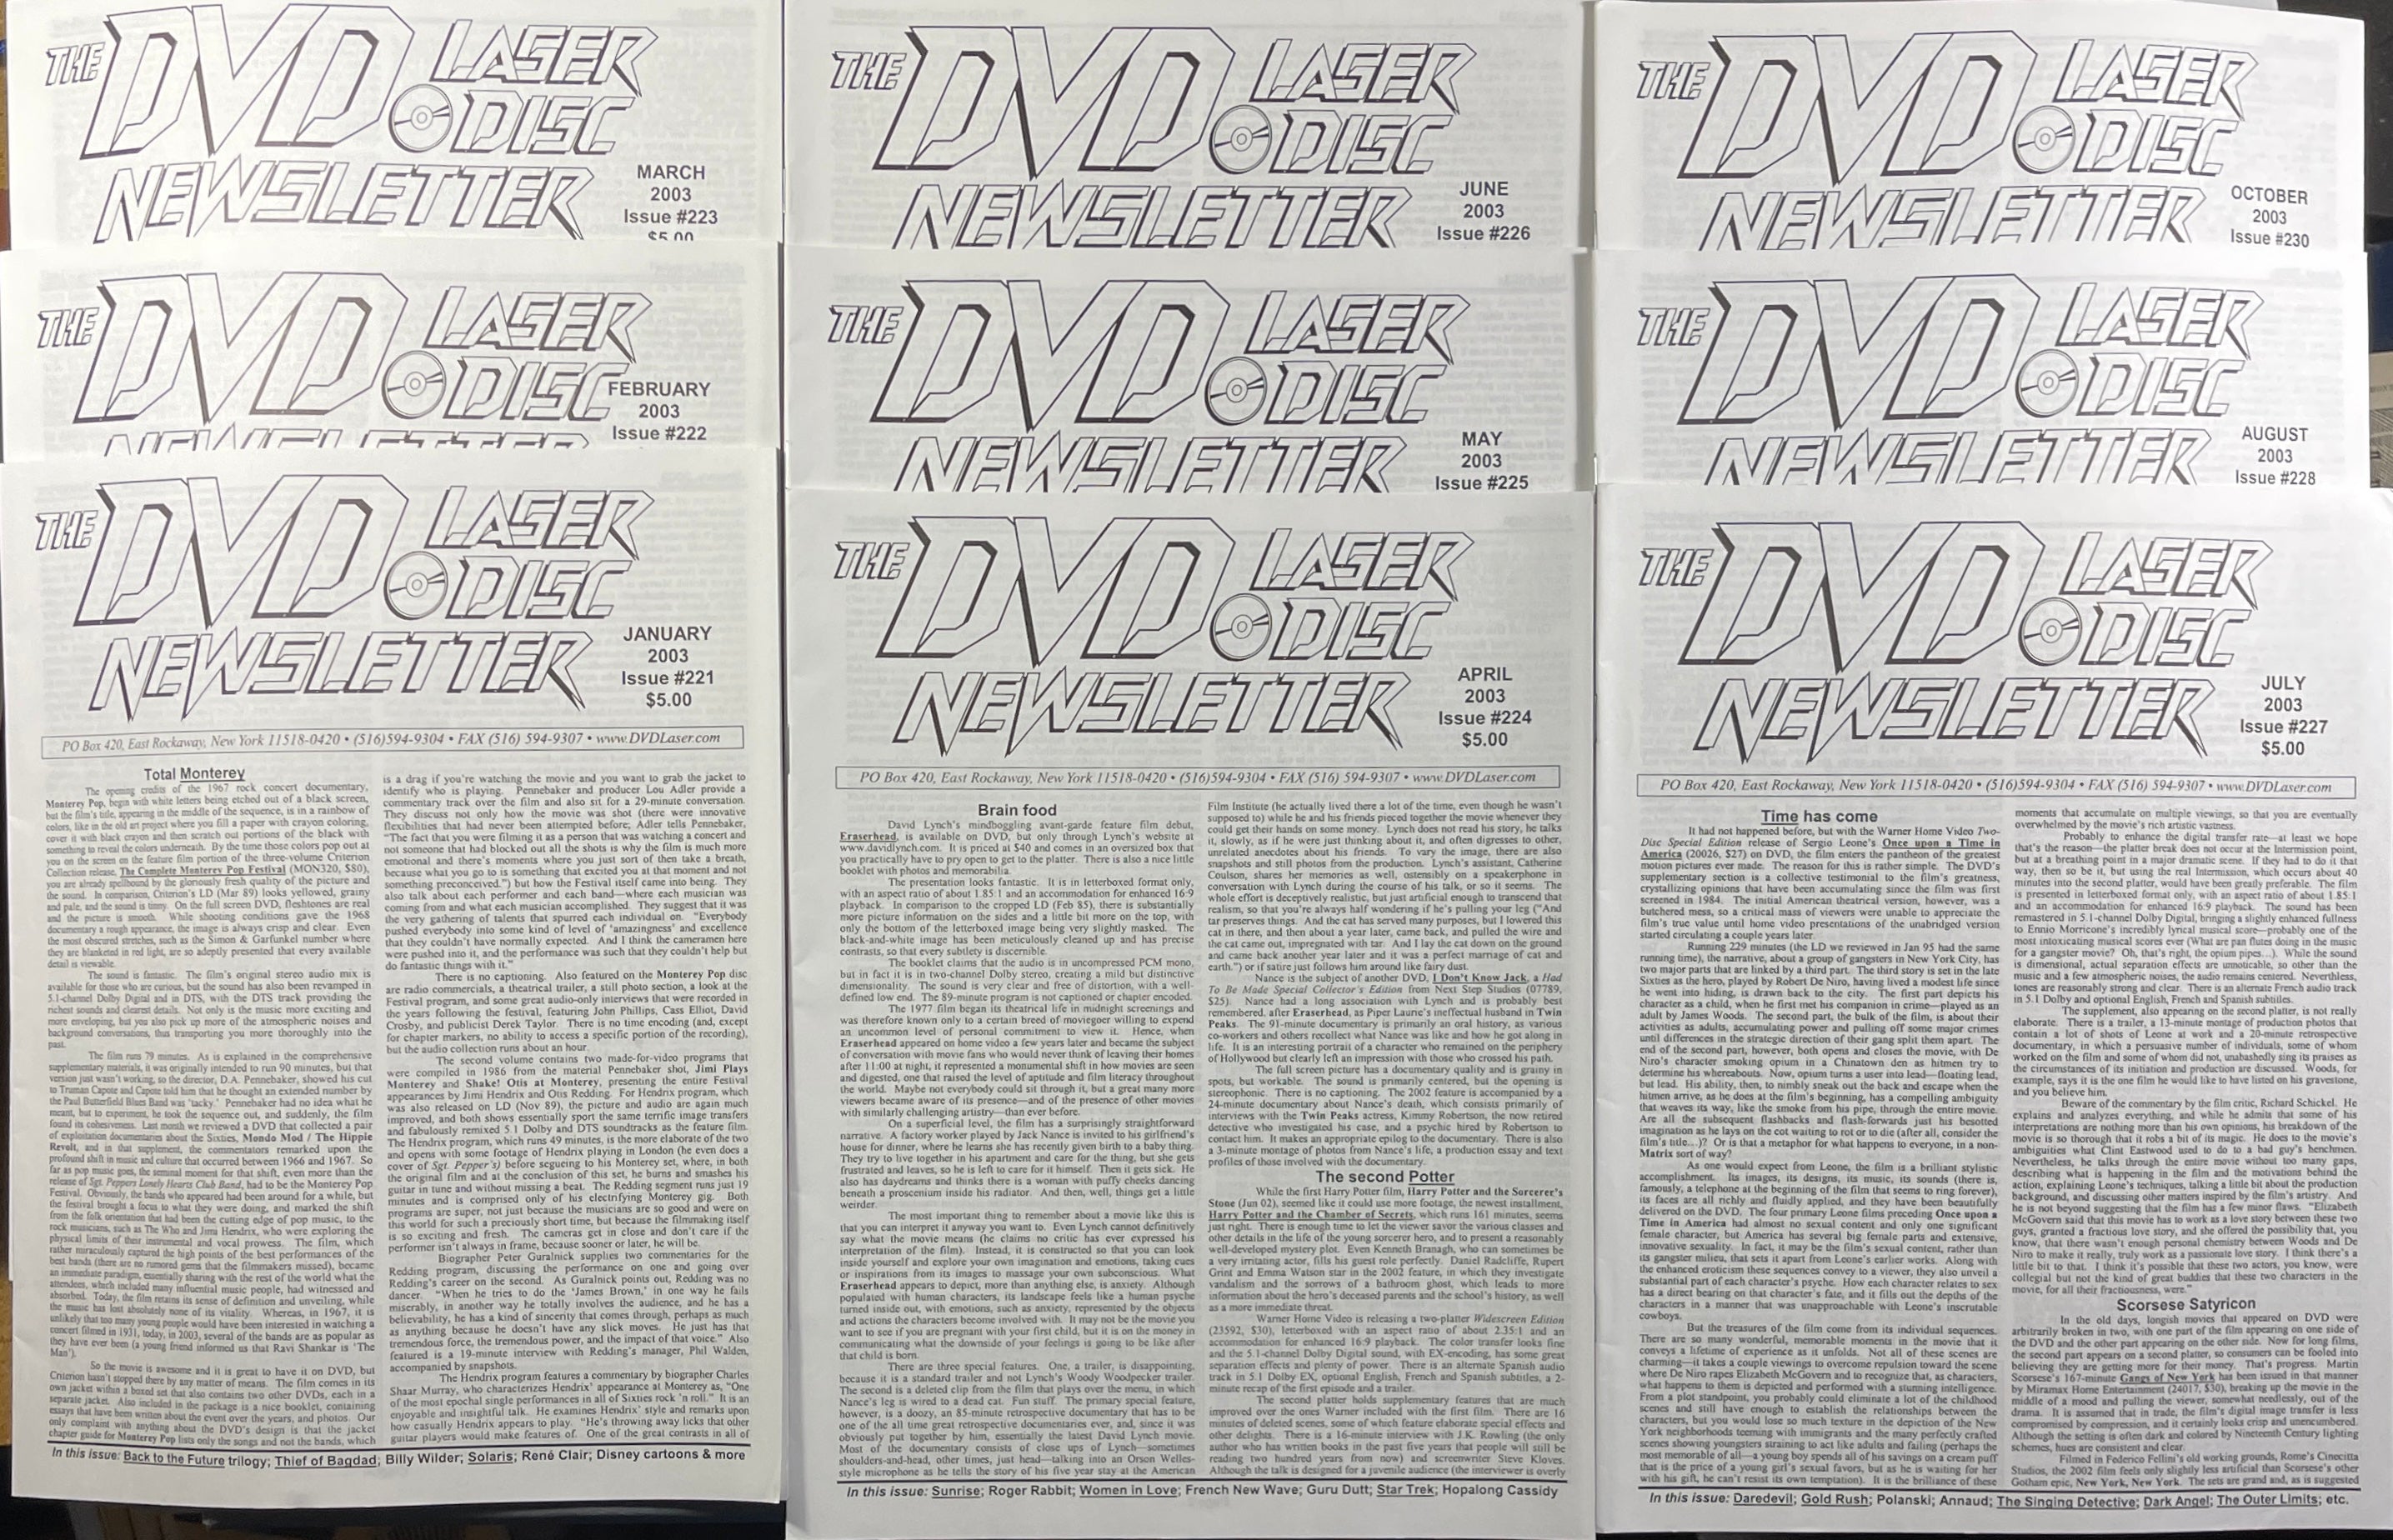 The DVD-Laser Disc Newsletter - 9 Issues (Jan-Aug, Oct) 2003 at Adirondack Retro